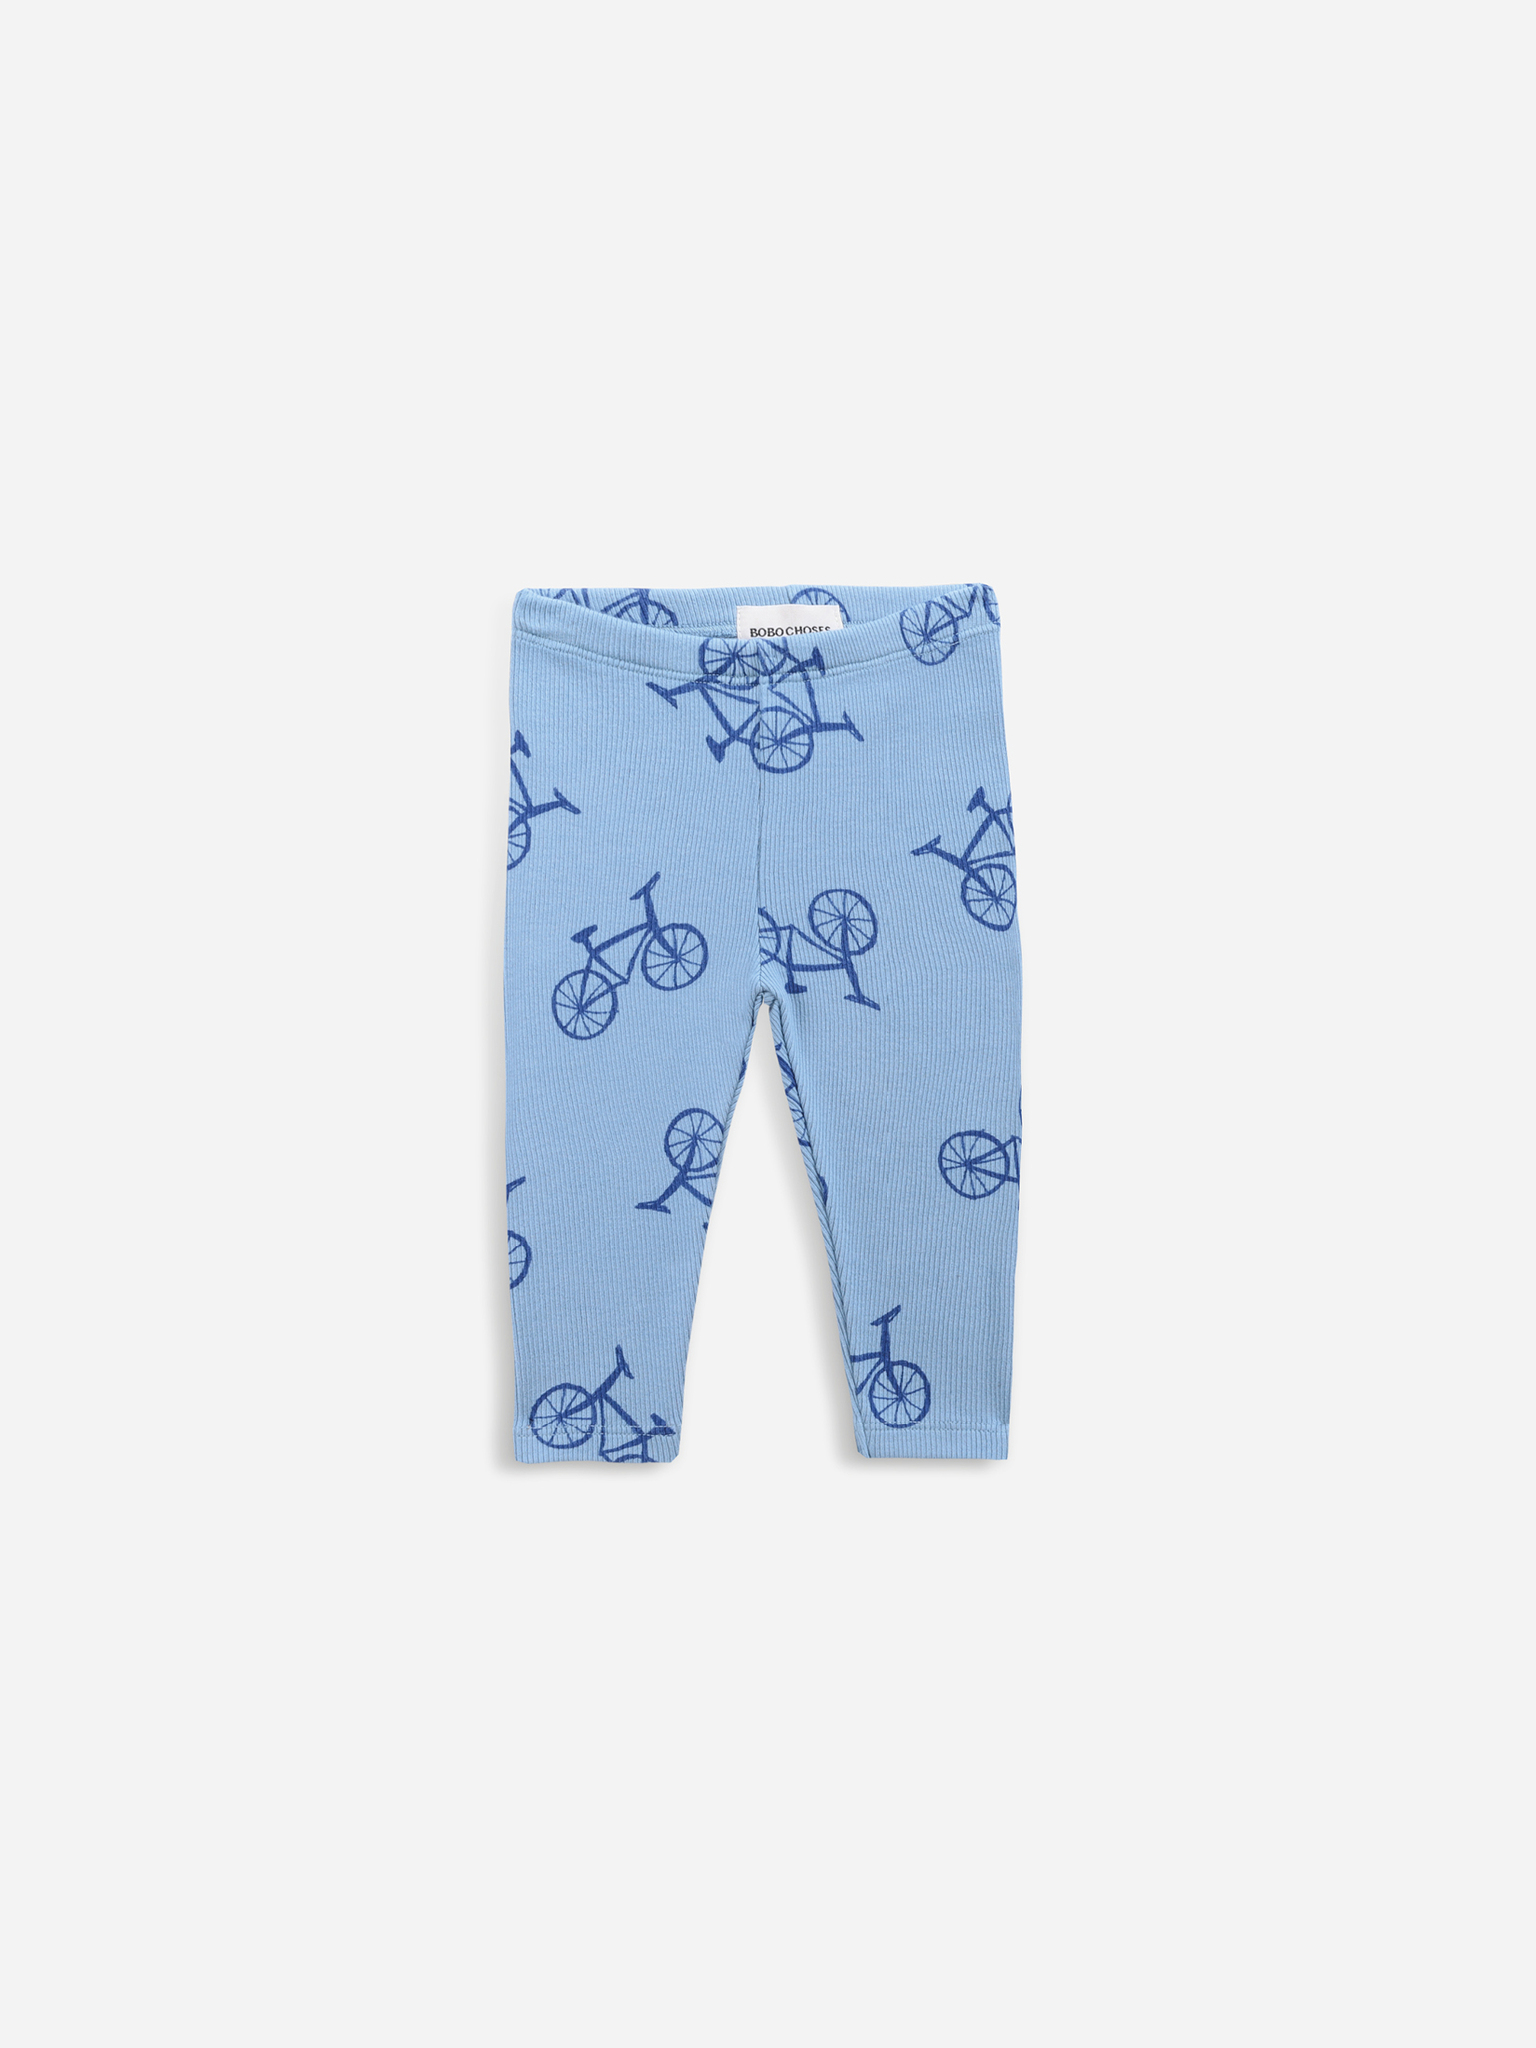 Bobo Choses Bicycle All Over Leggings